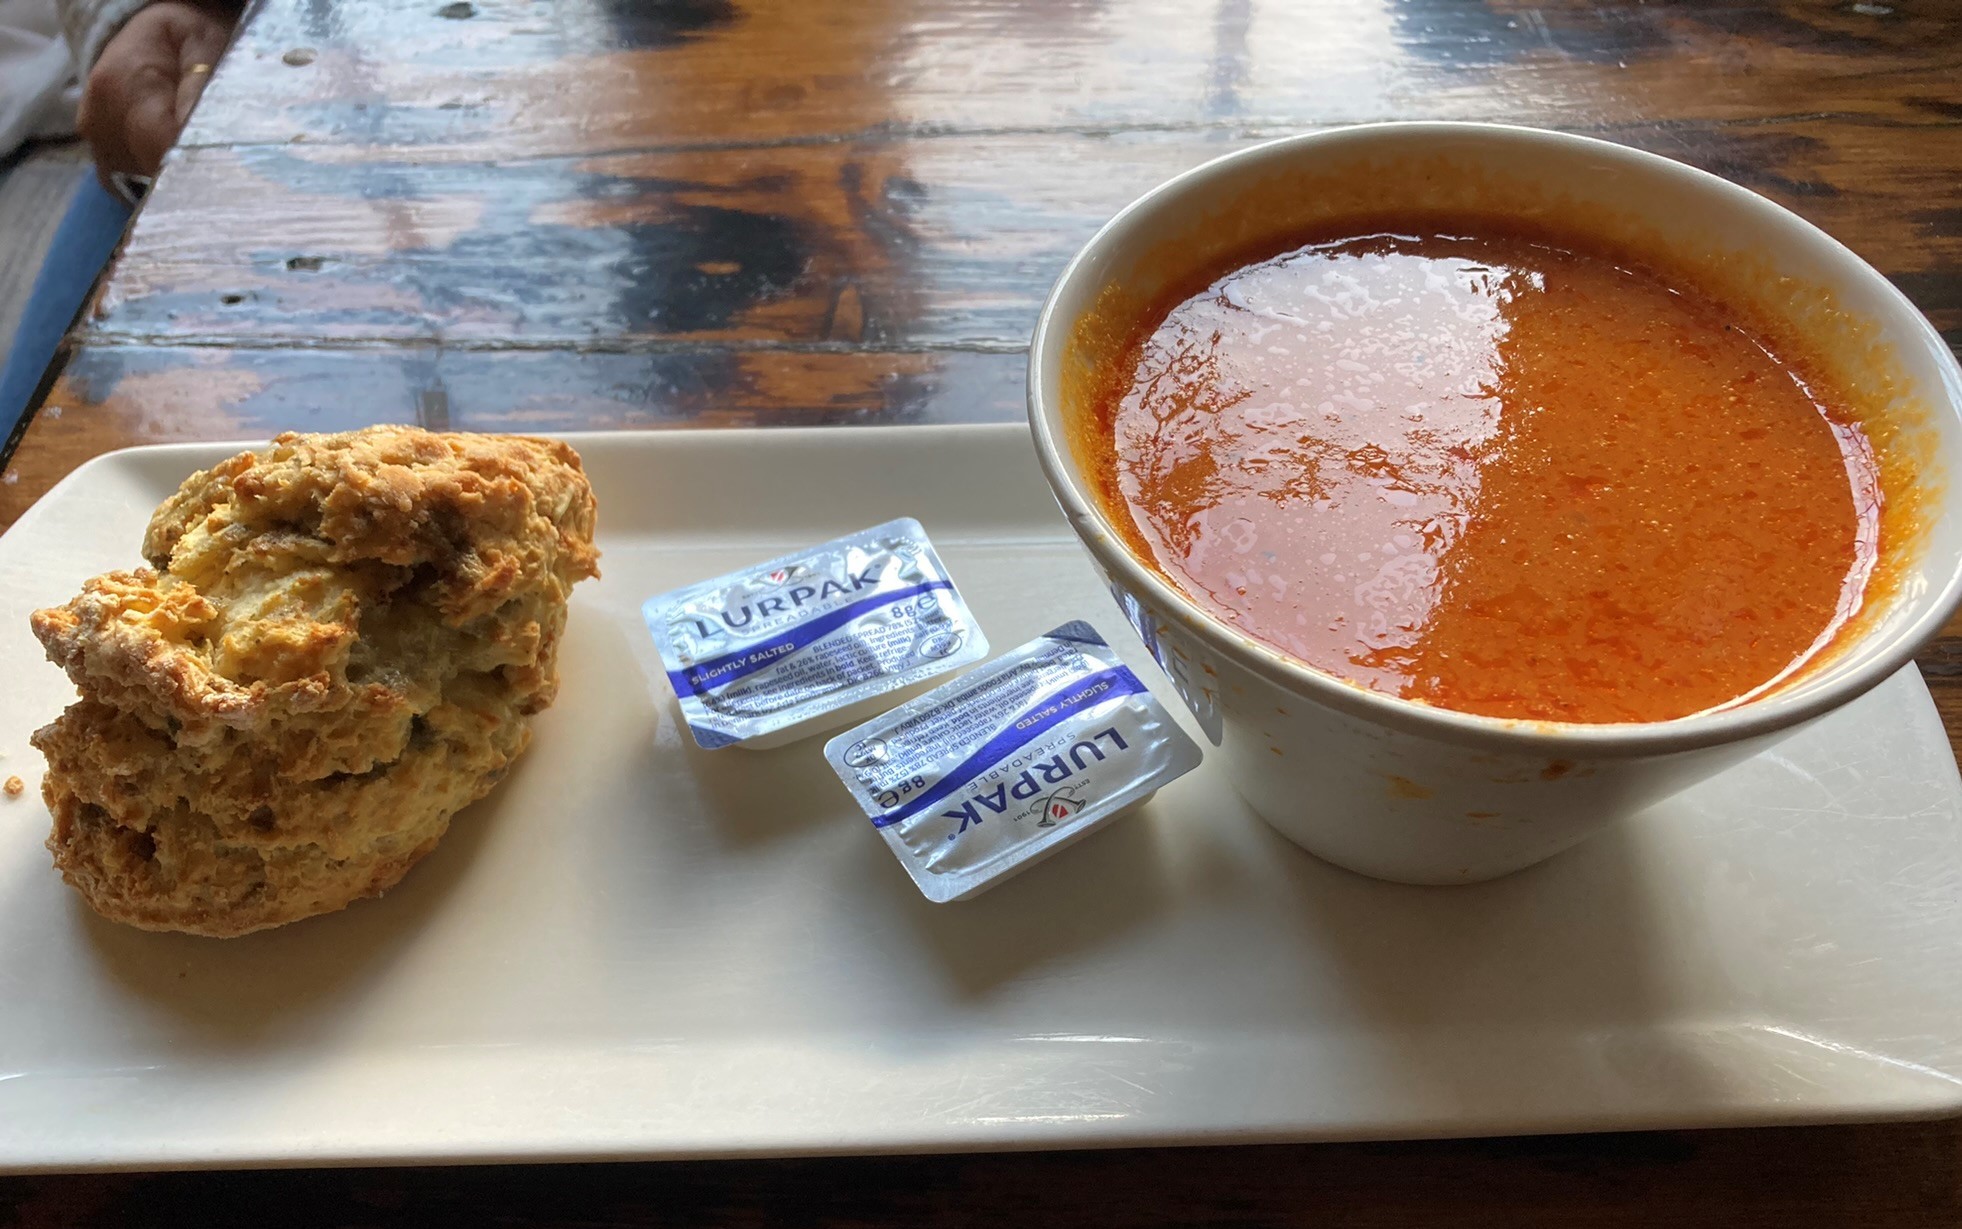 Petra's spicy sweet potato and red pepper soup with a smelly stillton scone